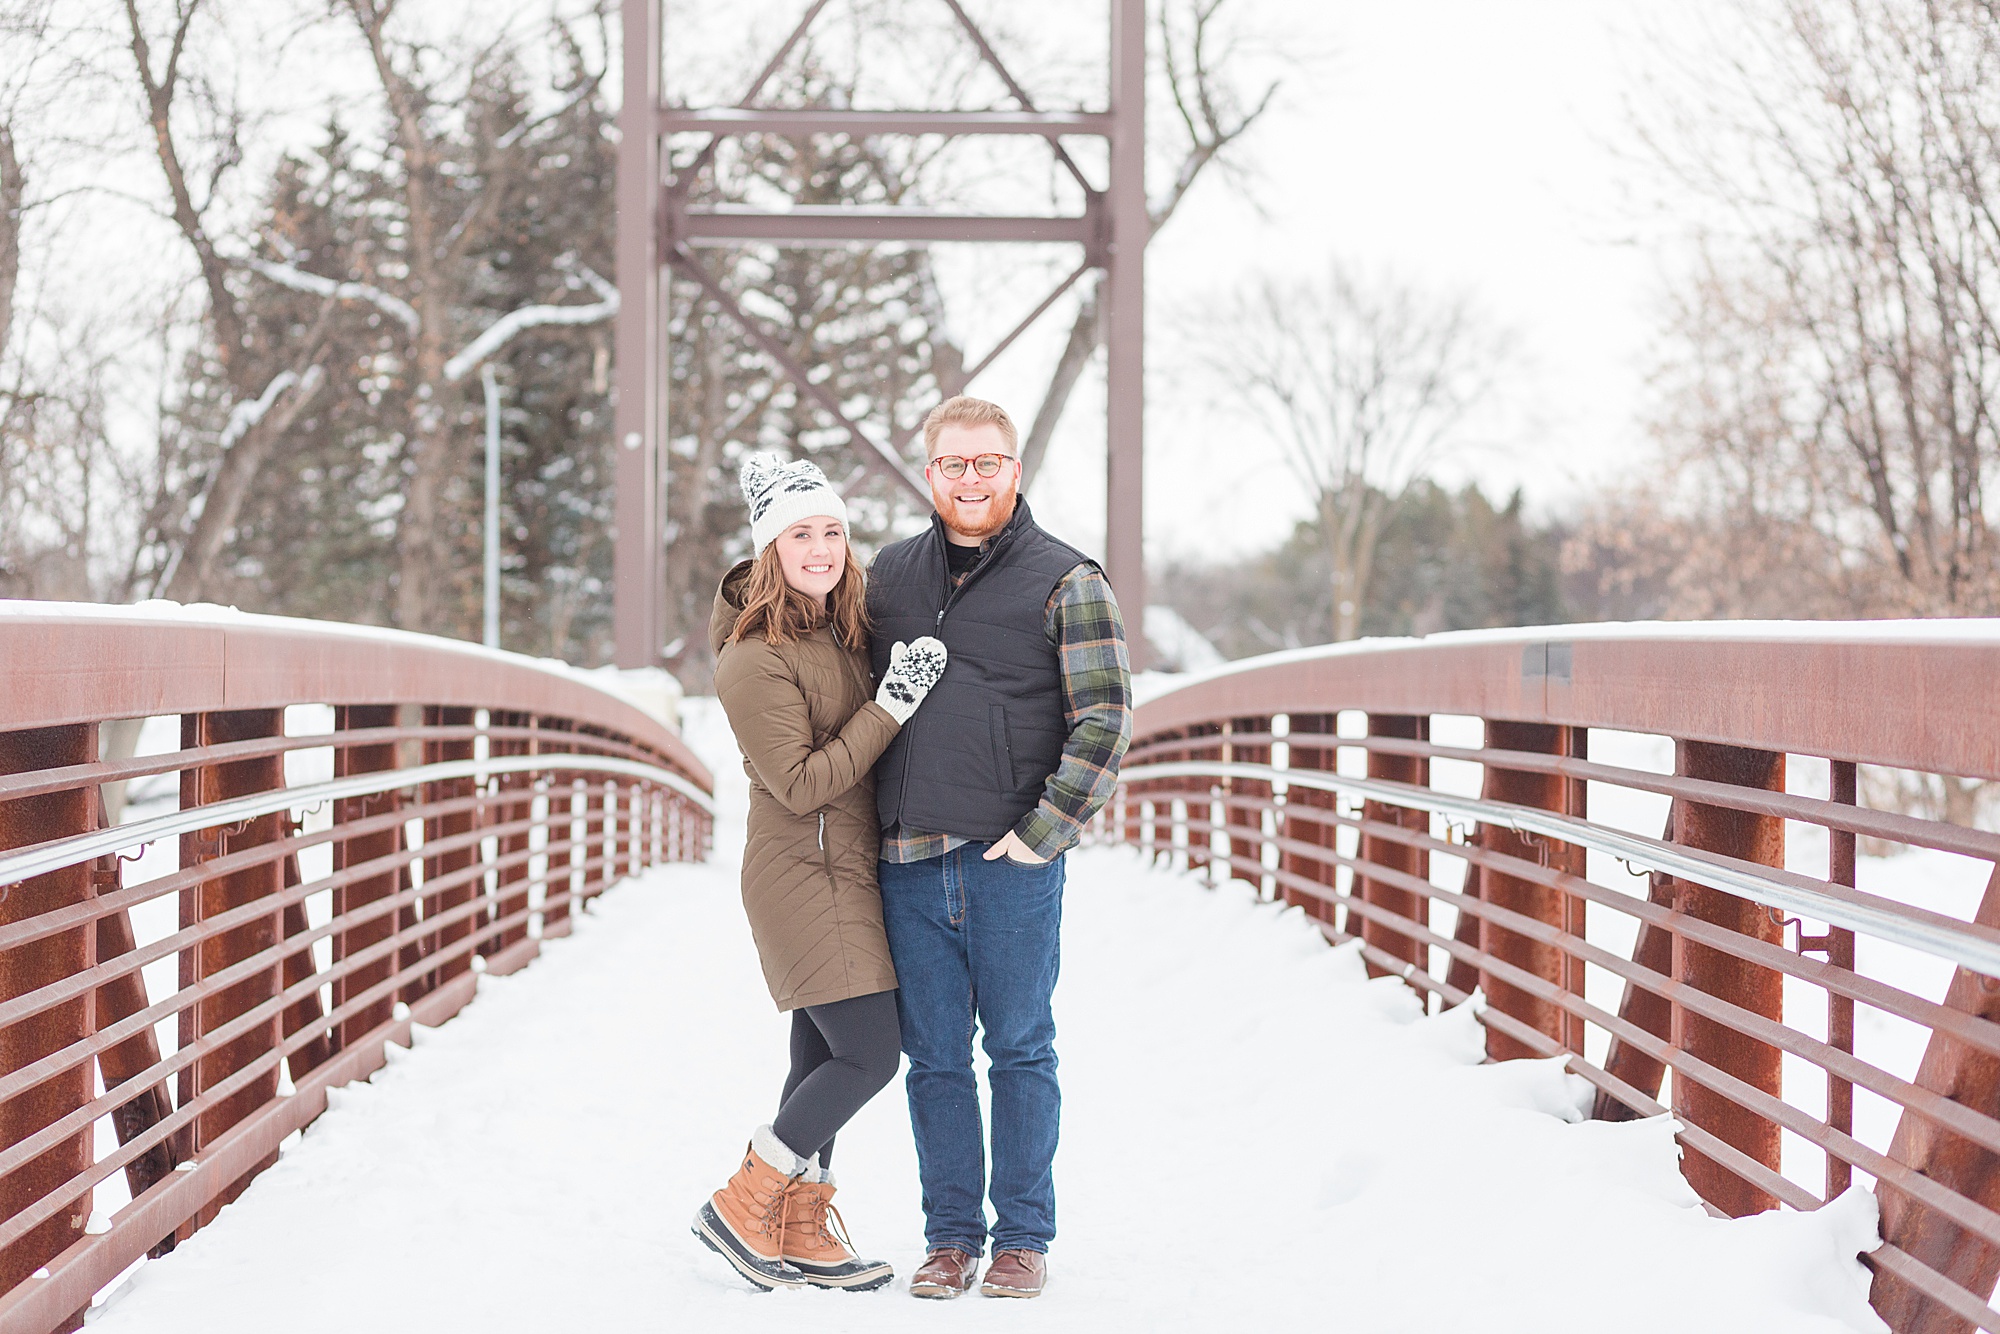 A couple in warm winter gear shows off that Lindenwood is one of the Best Places to take Engagement Photos in Fargo during the wintertime.